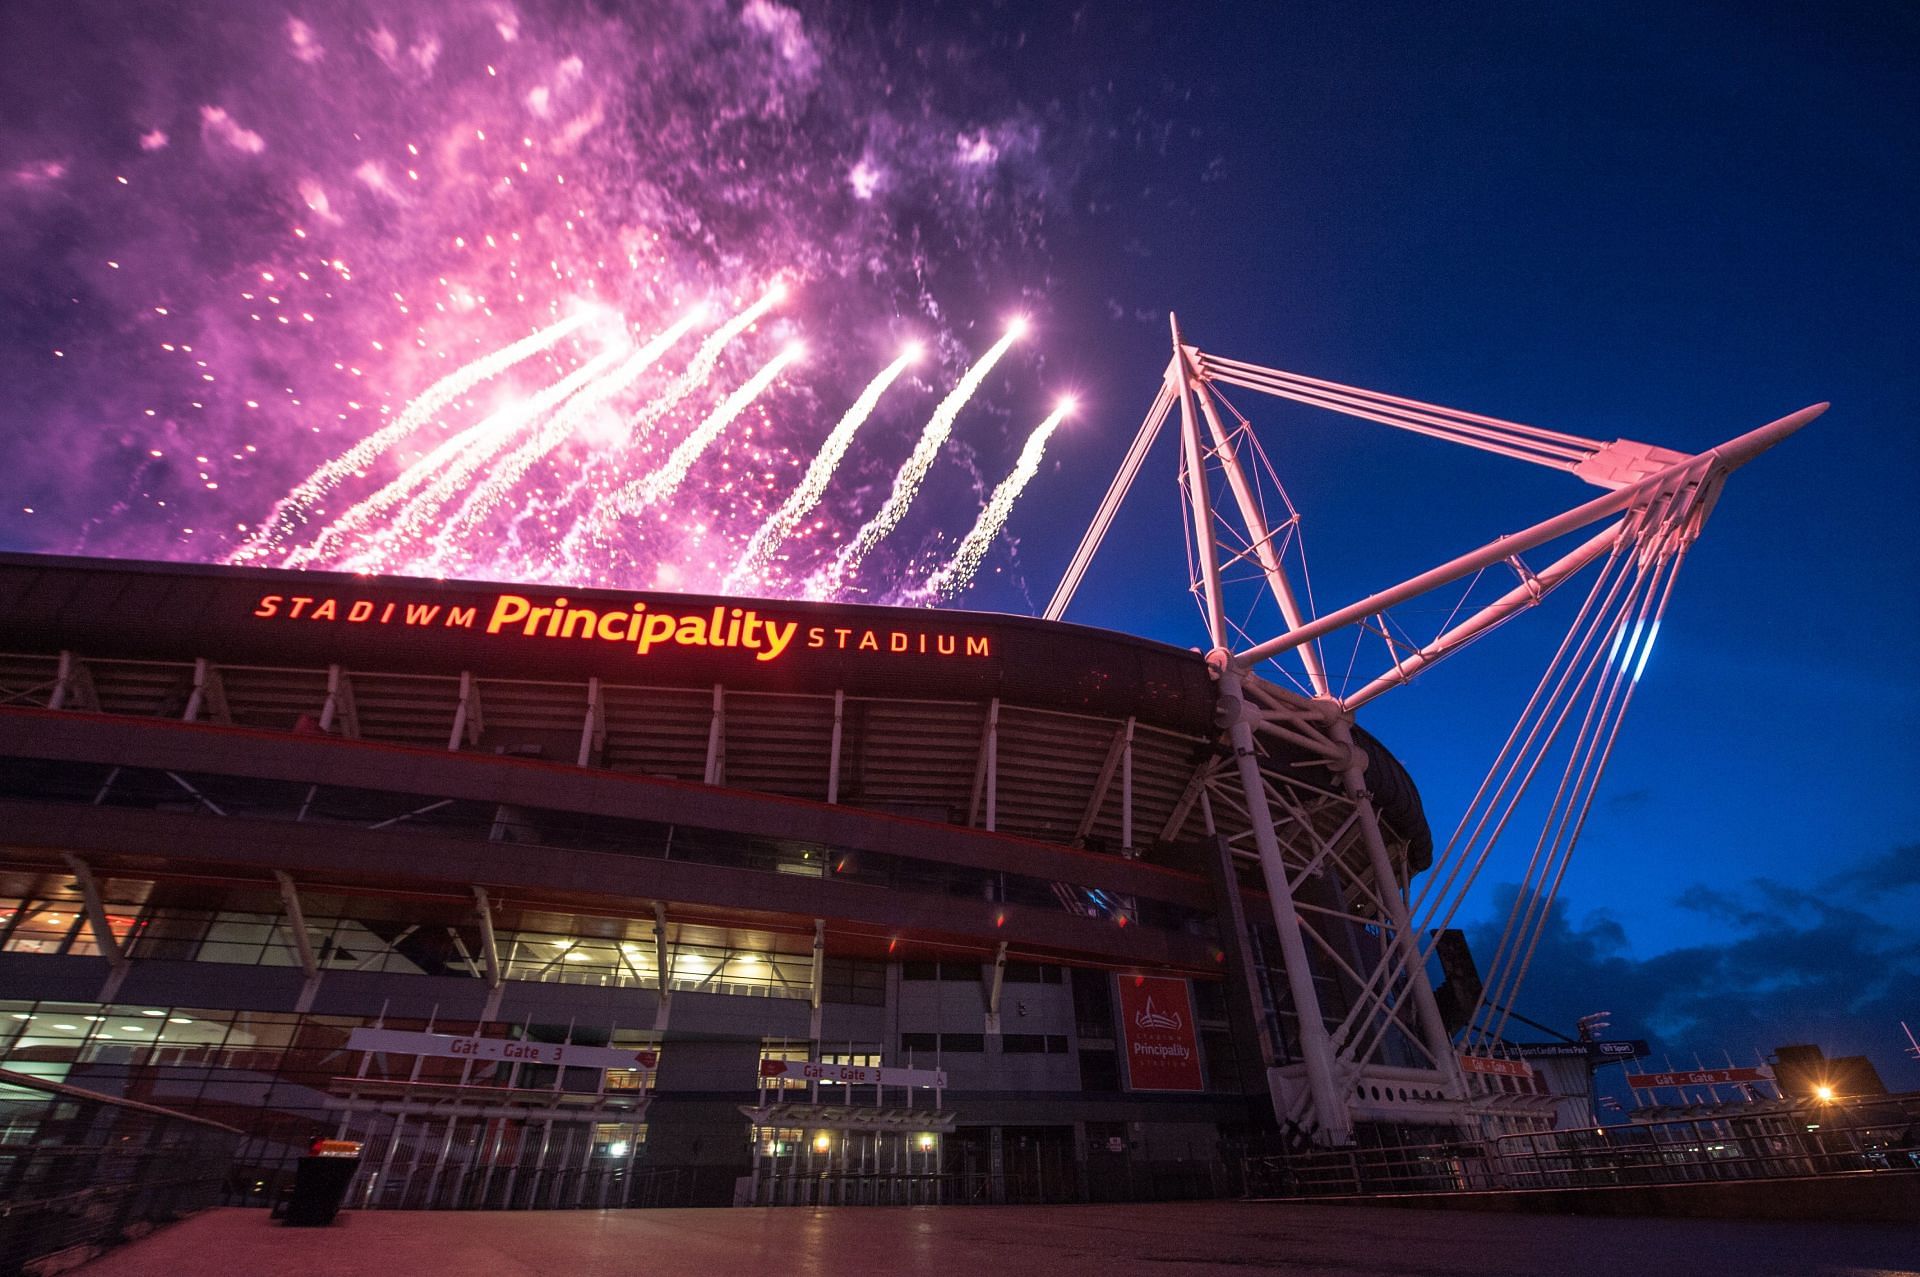 The Principality Stadium in Cardiff, Wales will host a major U.K. premium live event